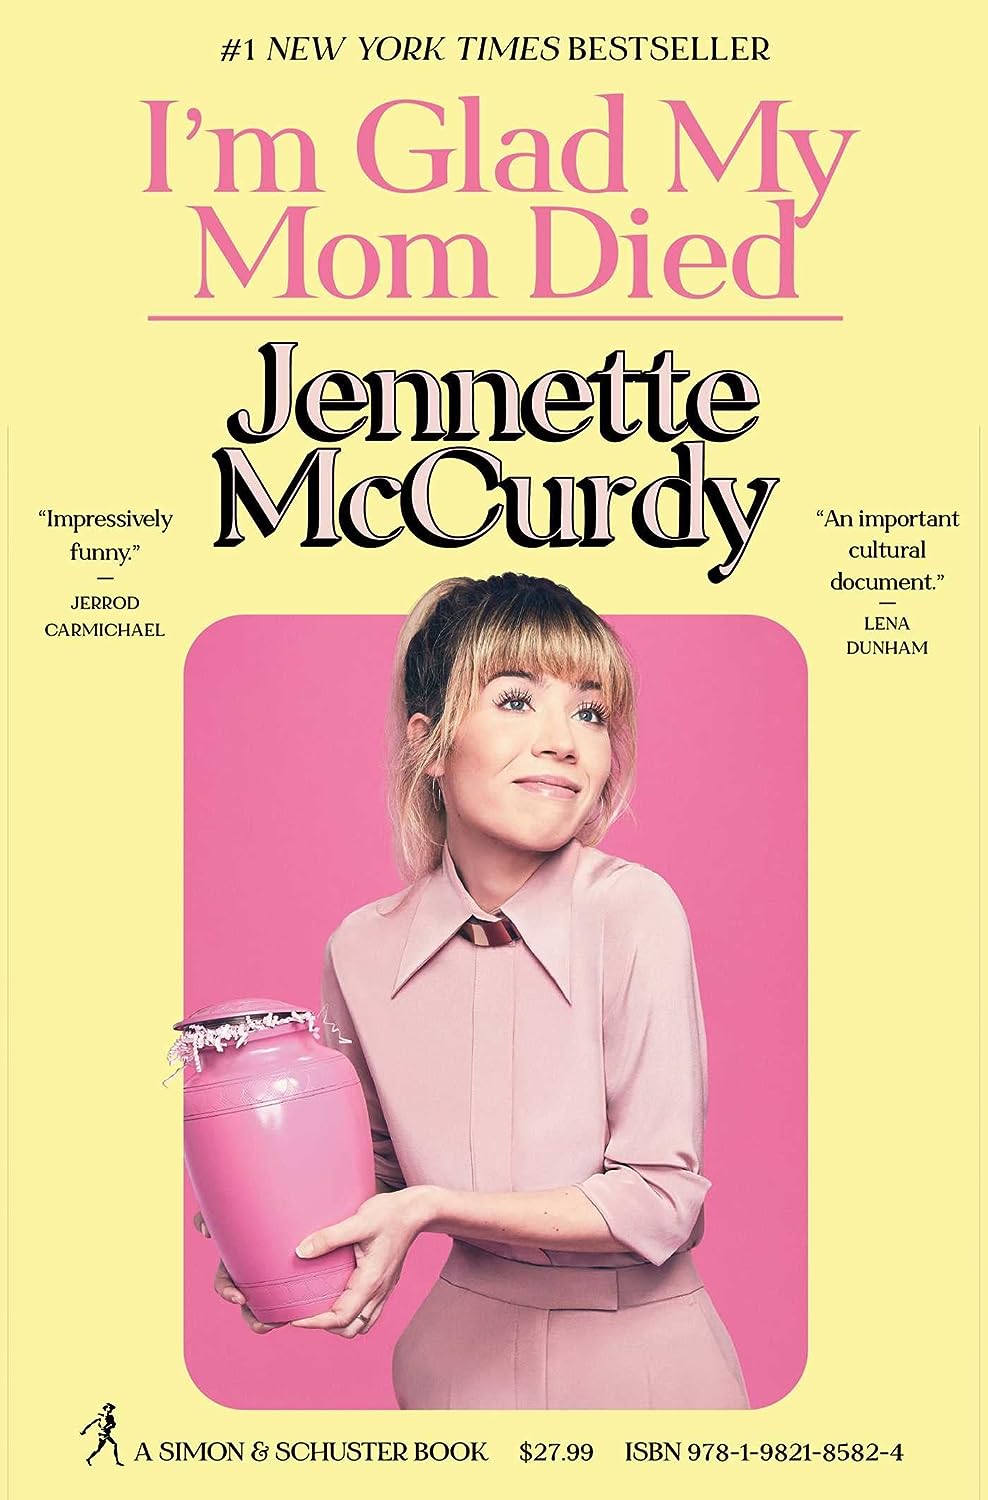 "I'm Glad My Mom Died" is a heartfelt and humorous memoir written by Jennette McCurdy, known for her roles in the television shows "iCarly" and "Sam & Cat." In this memoir, McCurdy shares her struggles as a former child actor, including battles with eating disorders, addiction, and a complicated relationship with her overbearing mother. She also explores how she regained control of her life.